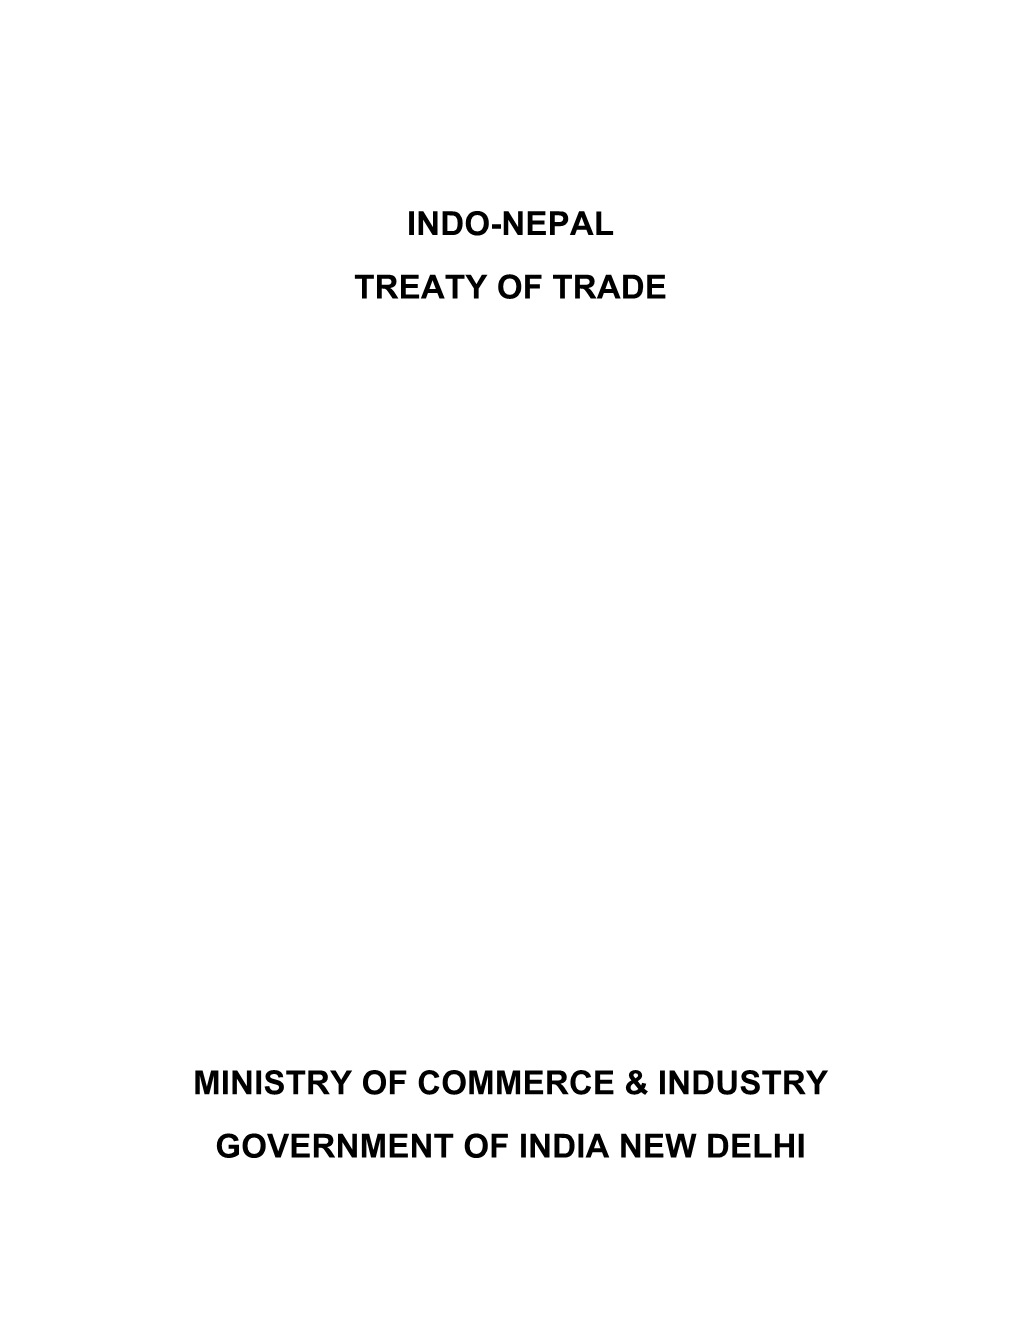 Indo-Nepal Treaty of Trade Ministry of Commerce